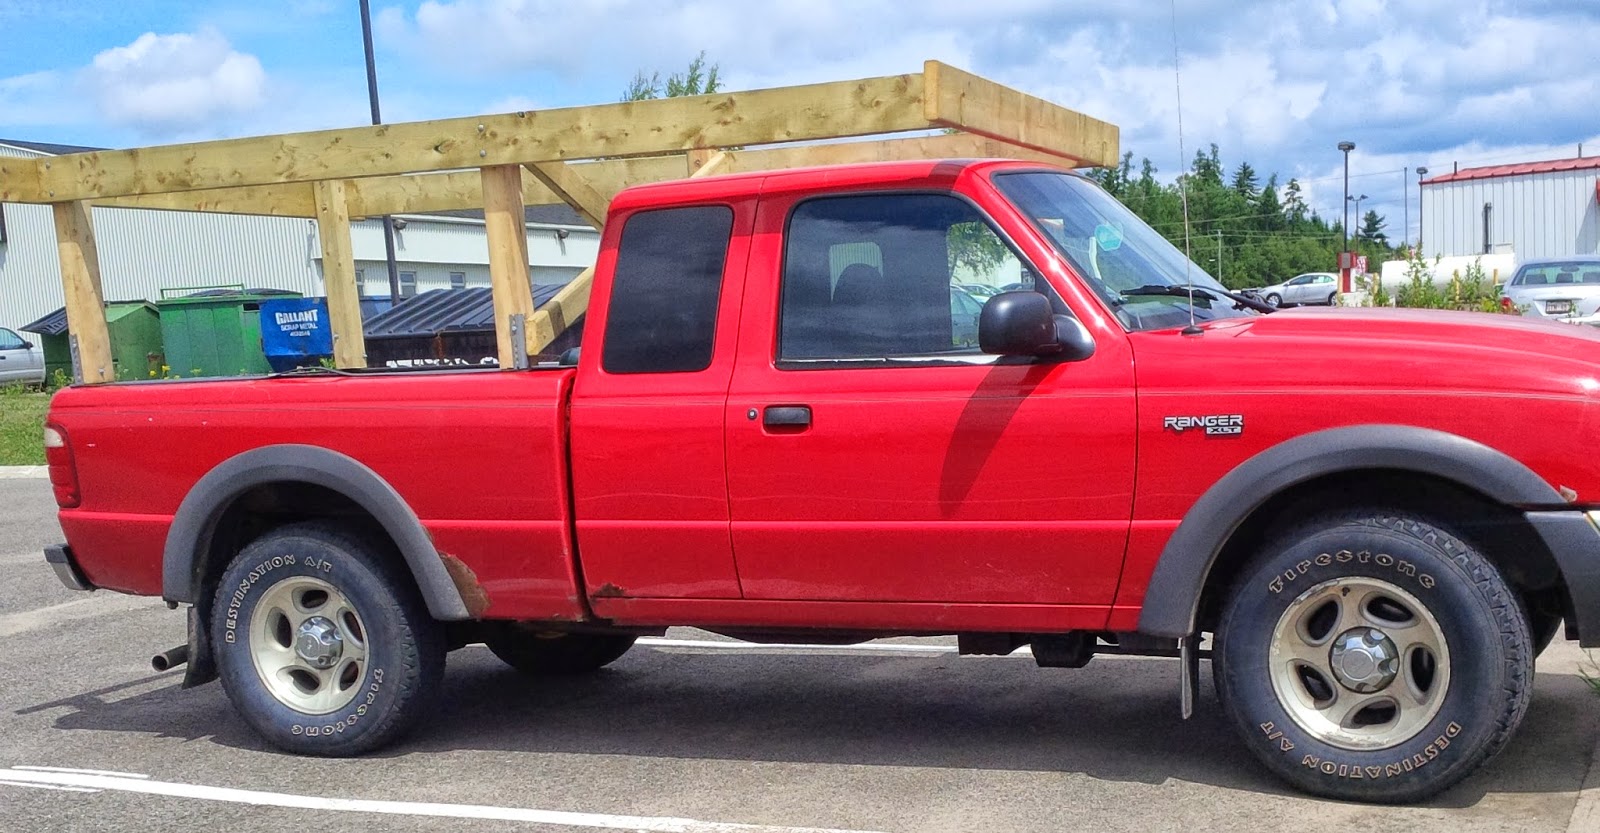  THE Place to Bitch!!: Plans - Building a Canoe Rack for a Ford Ranger